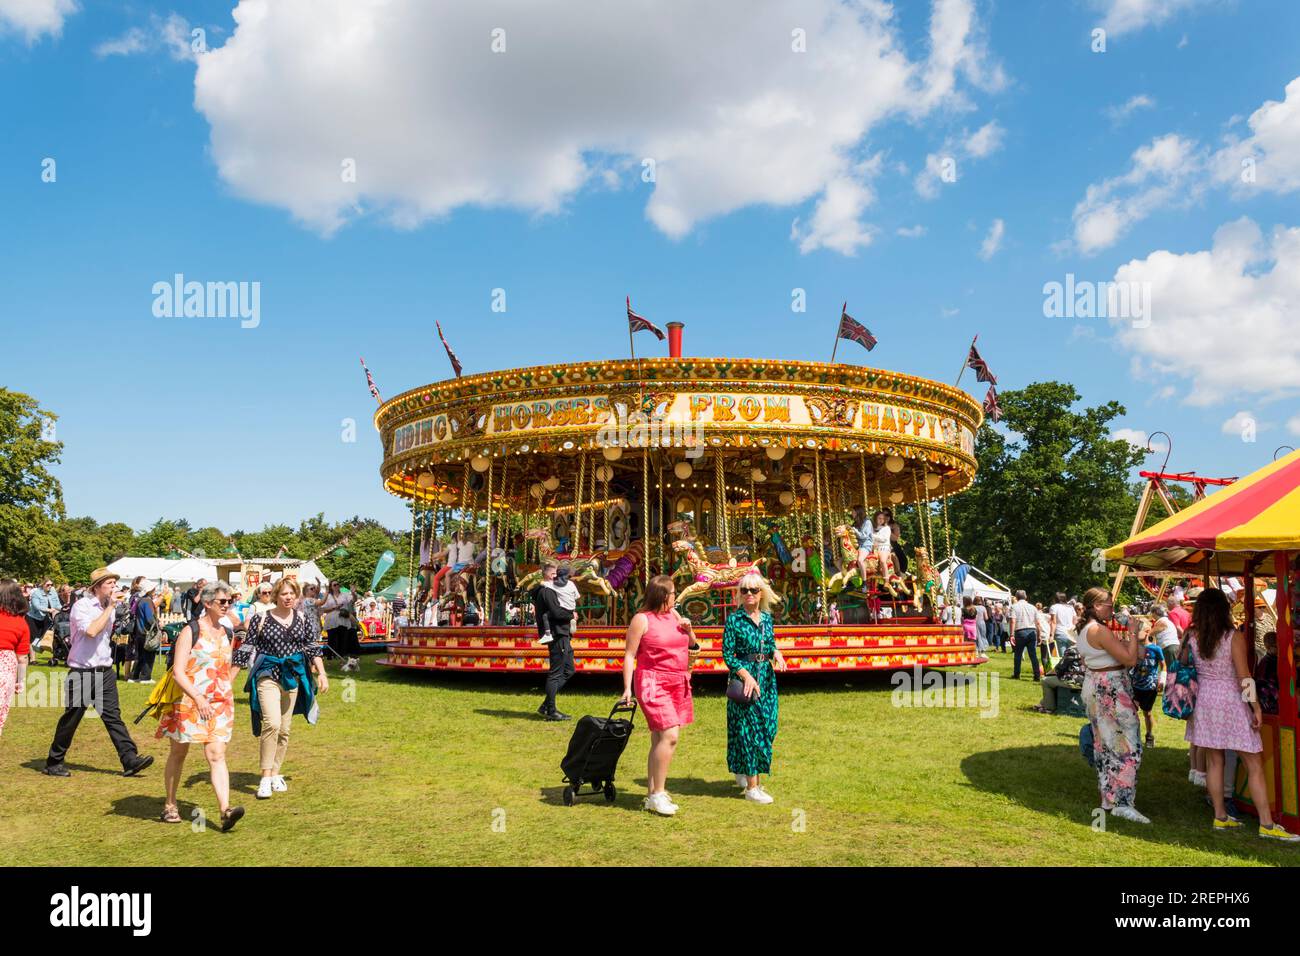 Galloping horses roundabout at Sandringham Flower Show. Stock Photo